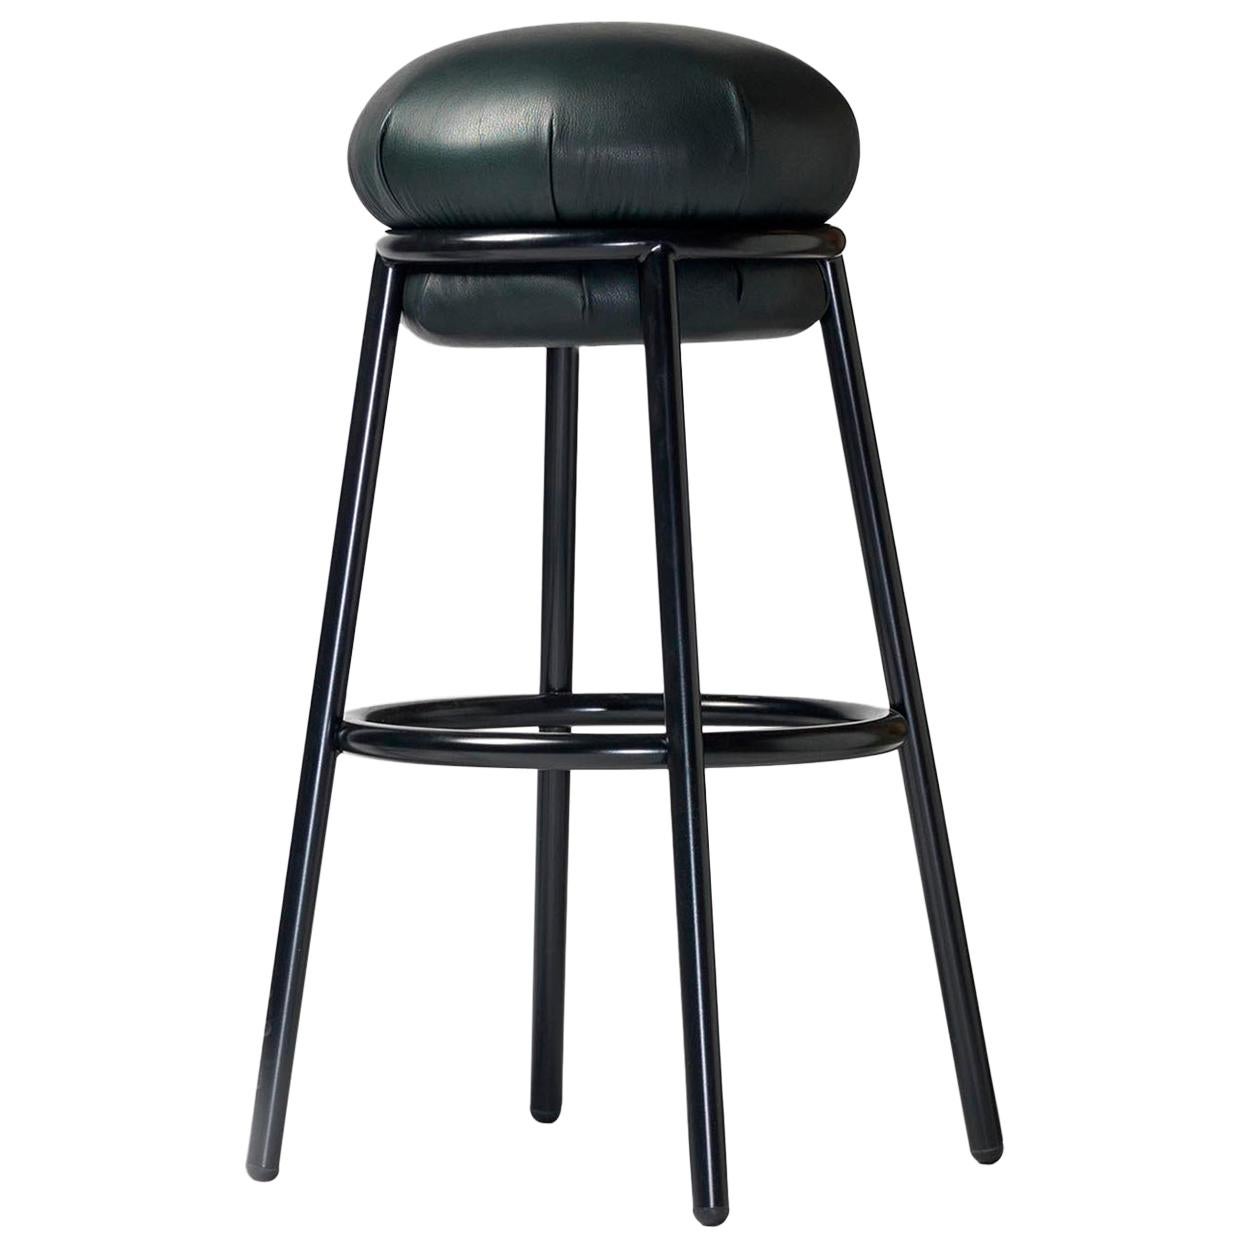 Contemporary bar stool "Grasso" by Stephen Burks, black lacquered, green leather For Sale